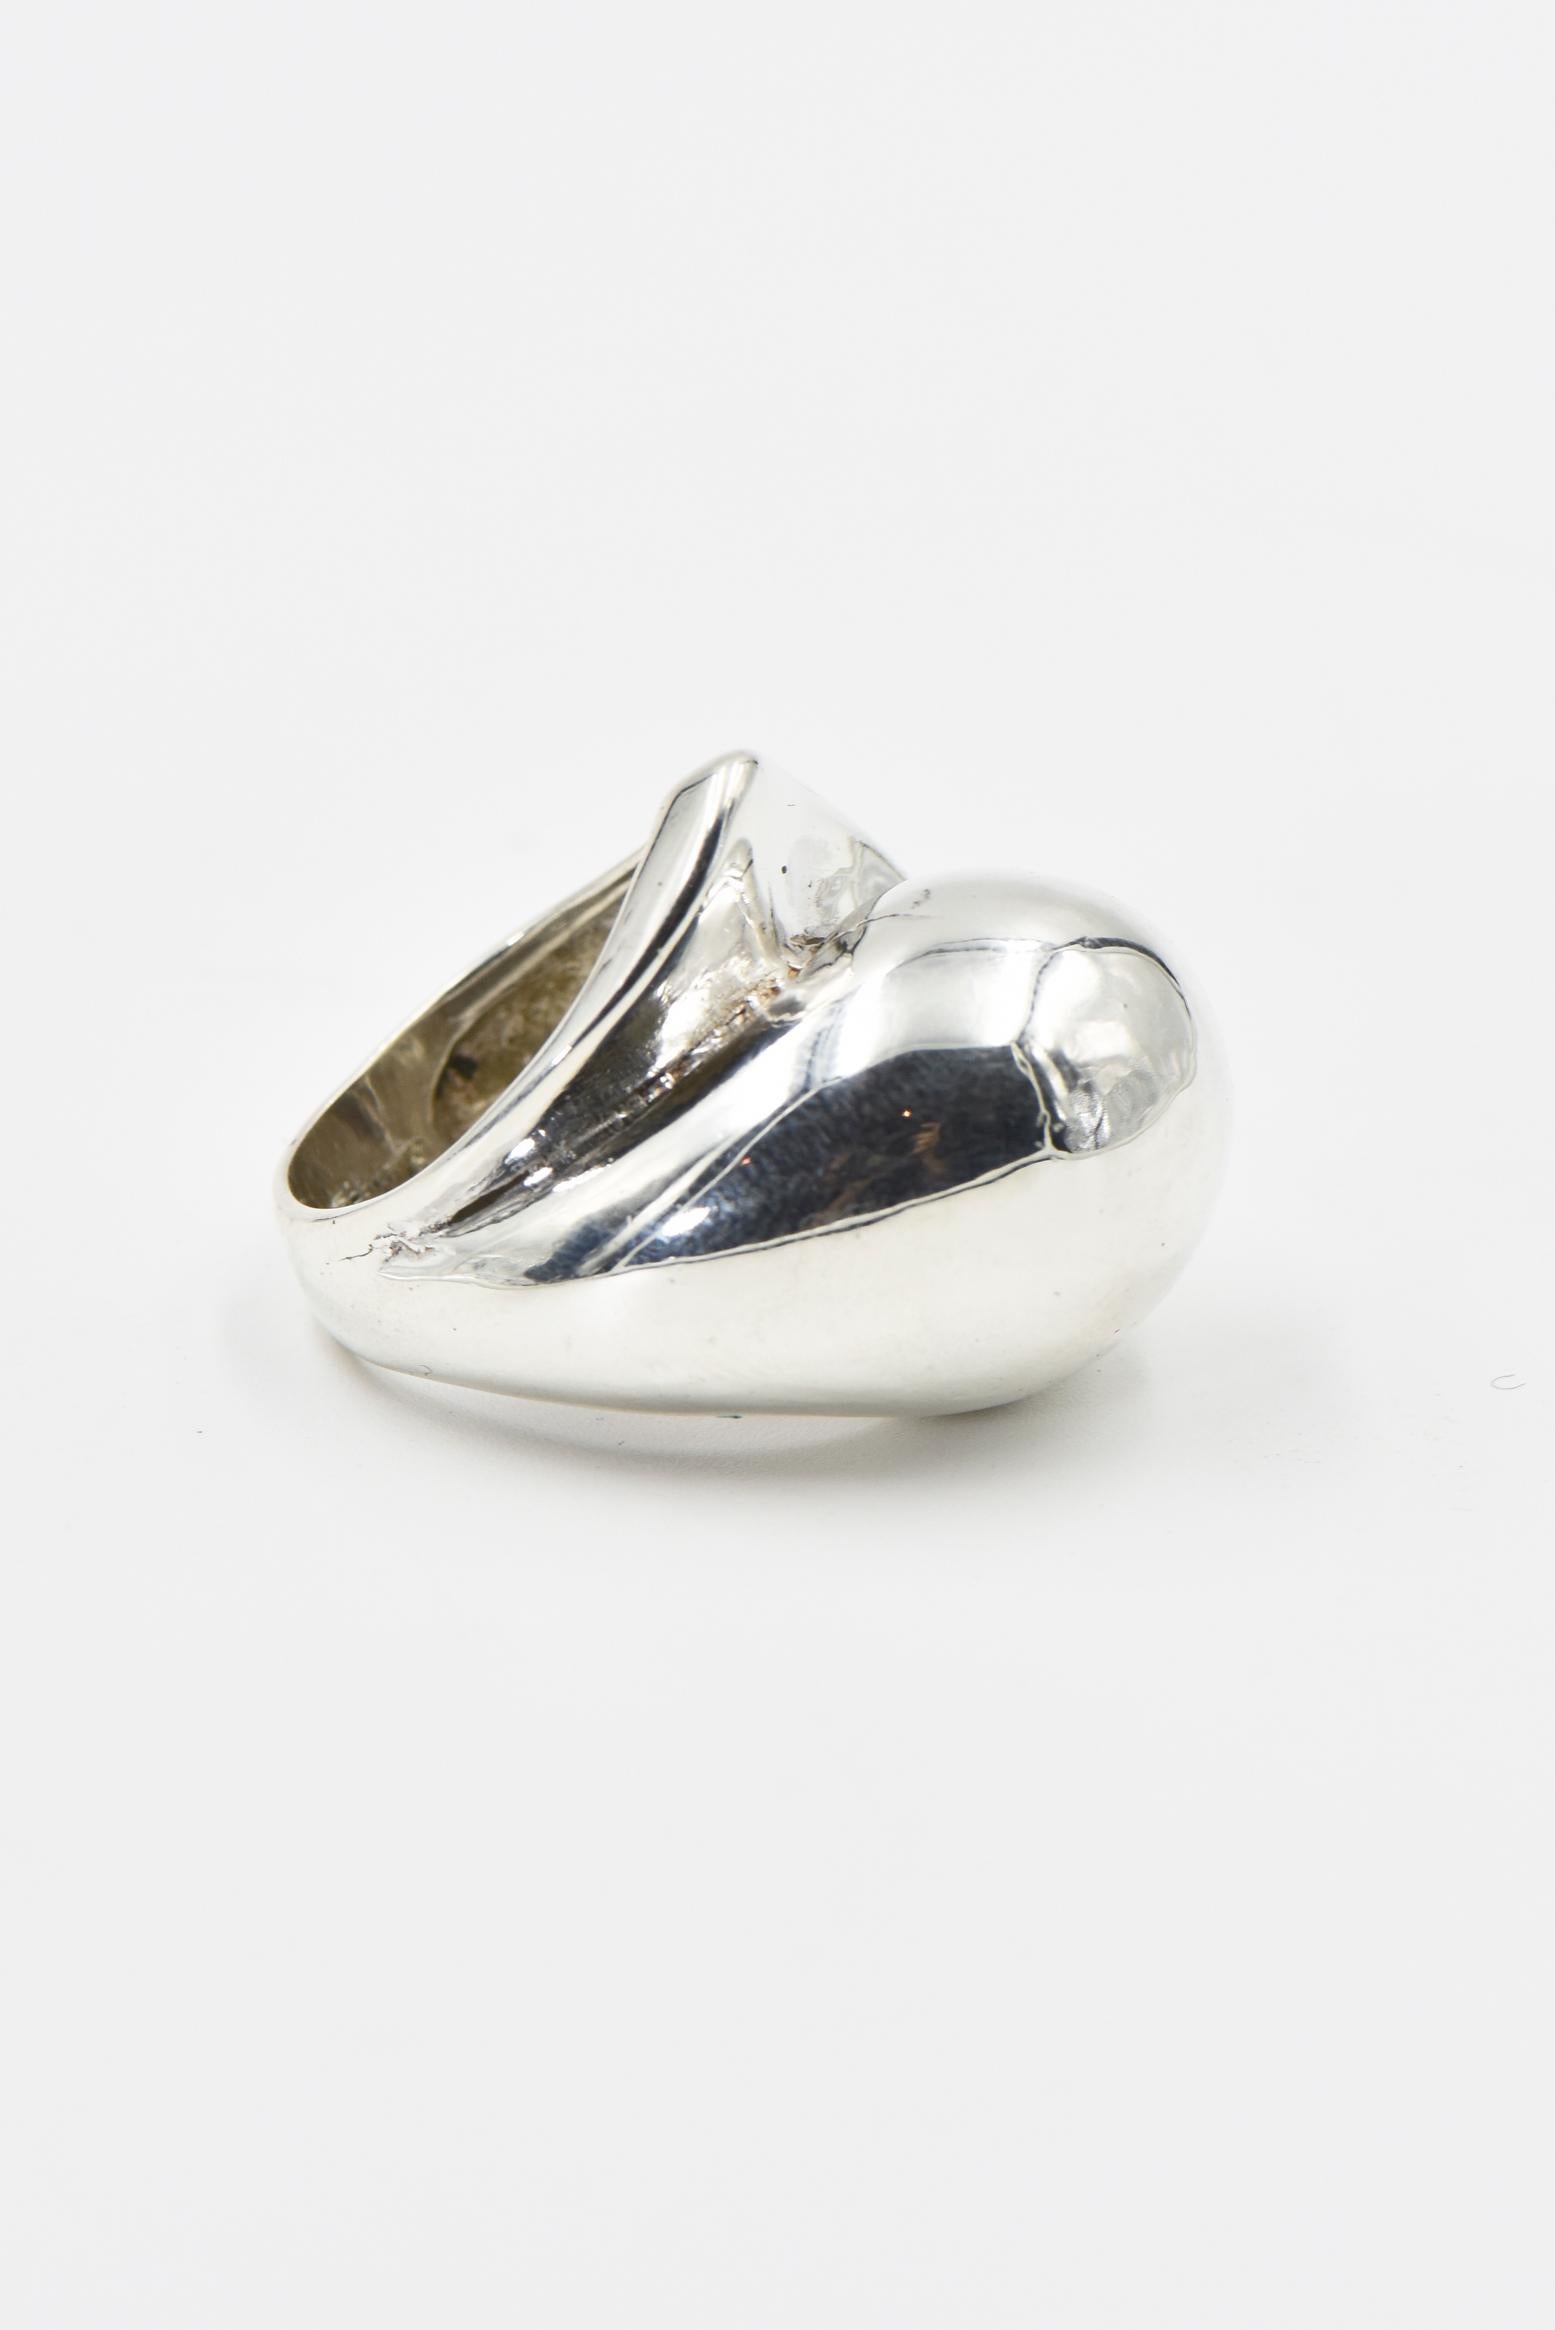 Women's or Men's Modernist Sterling Silver Dome Ring